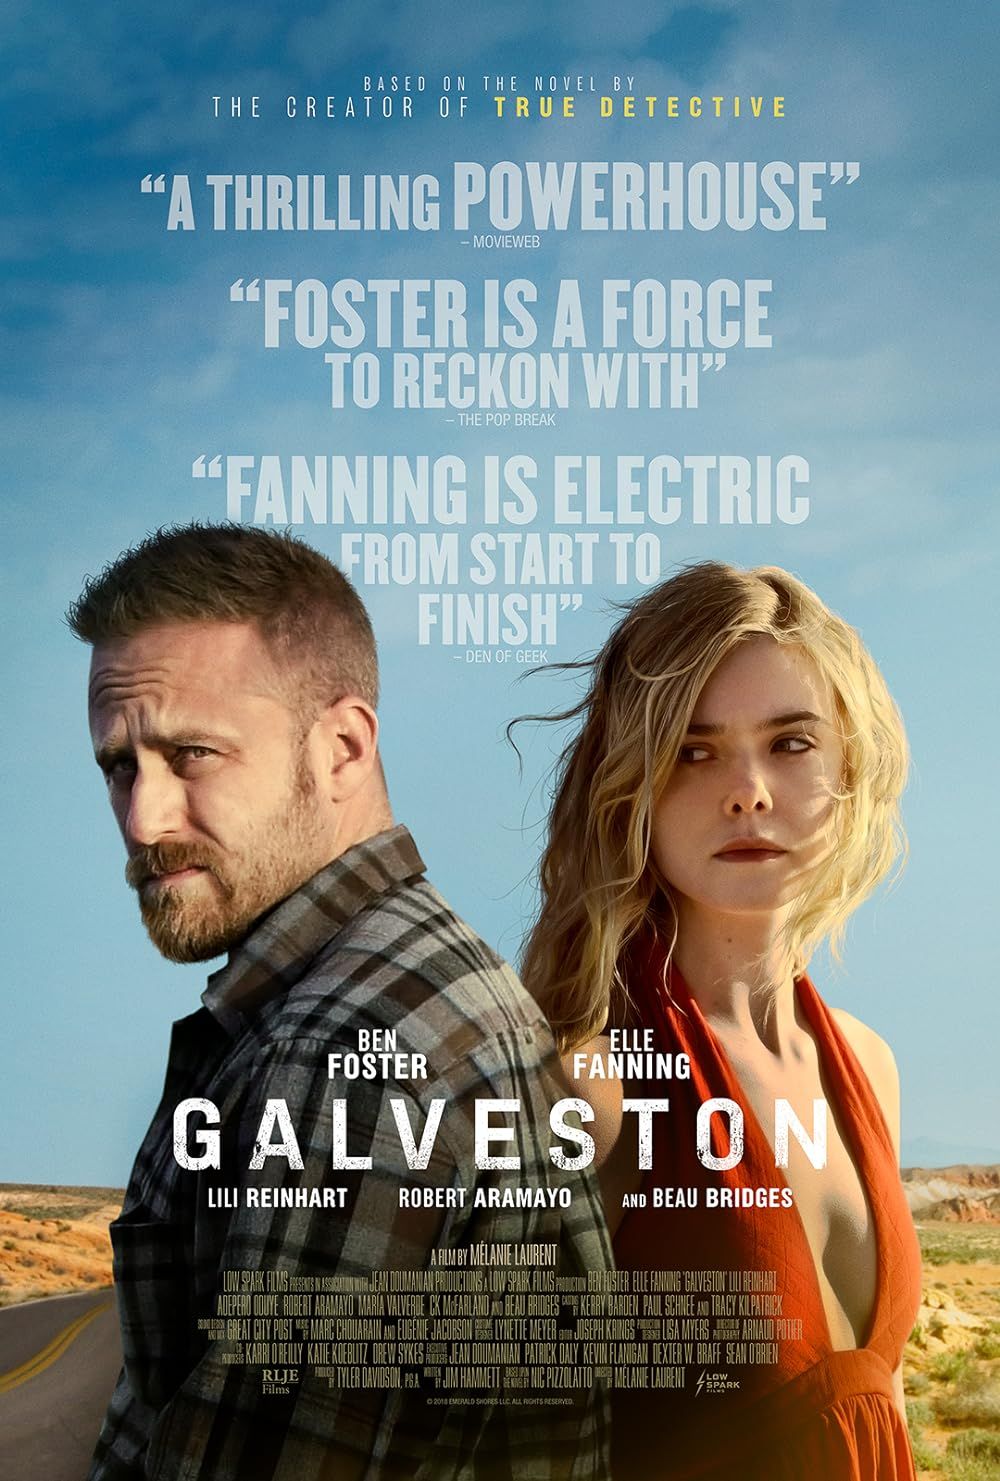 Ben Foster and Elle Fanning in the Galveston poster